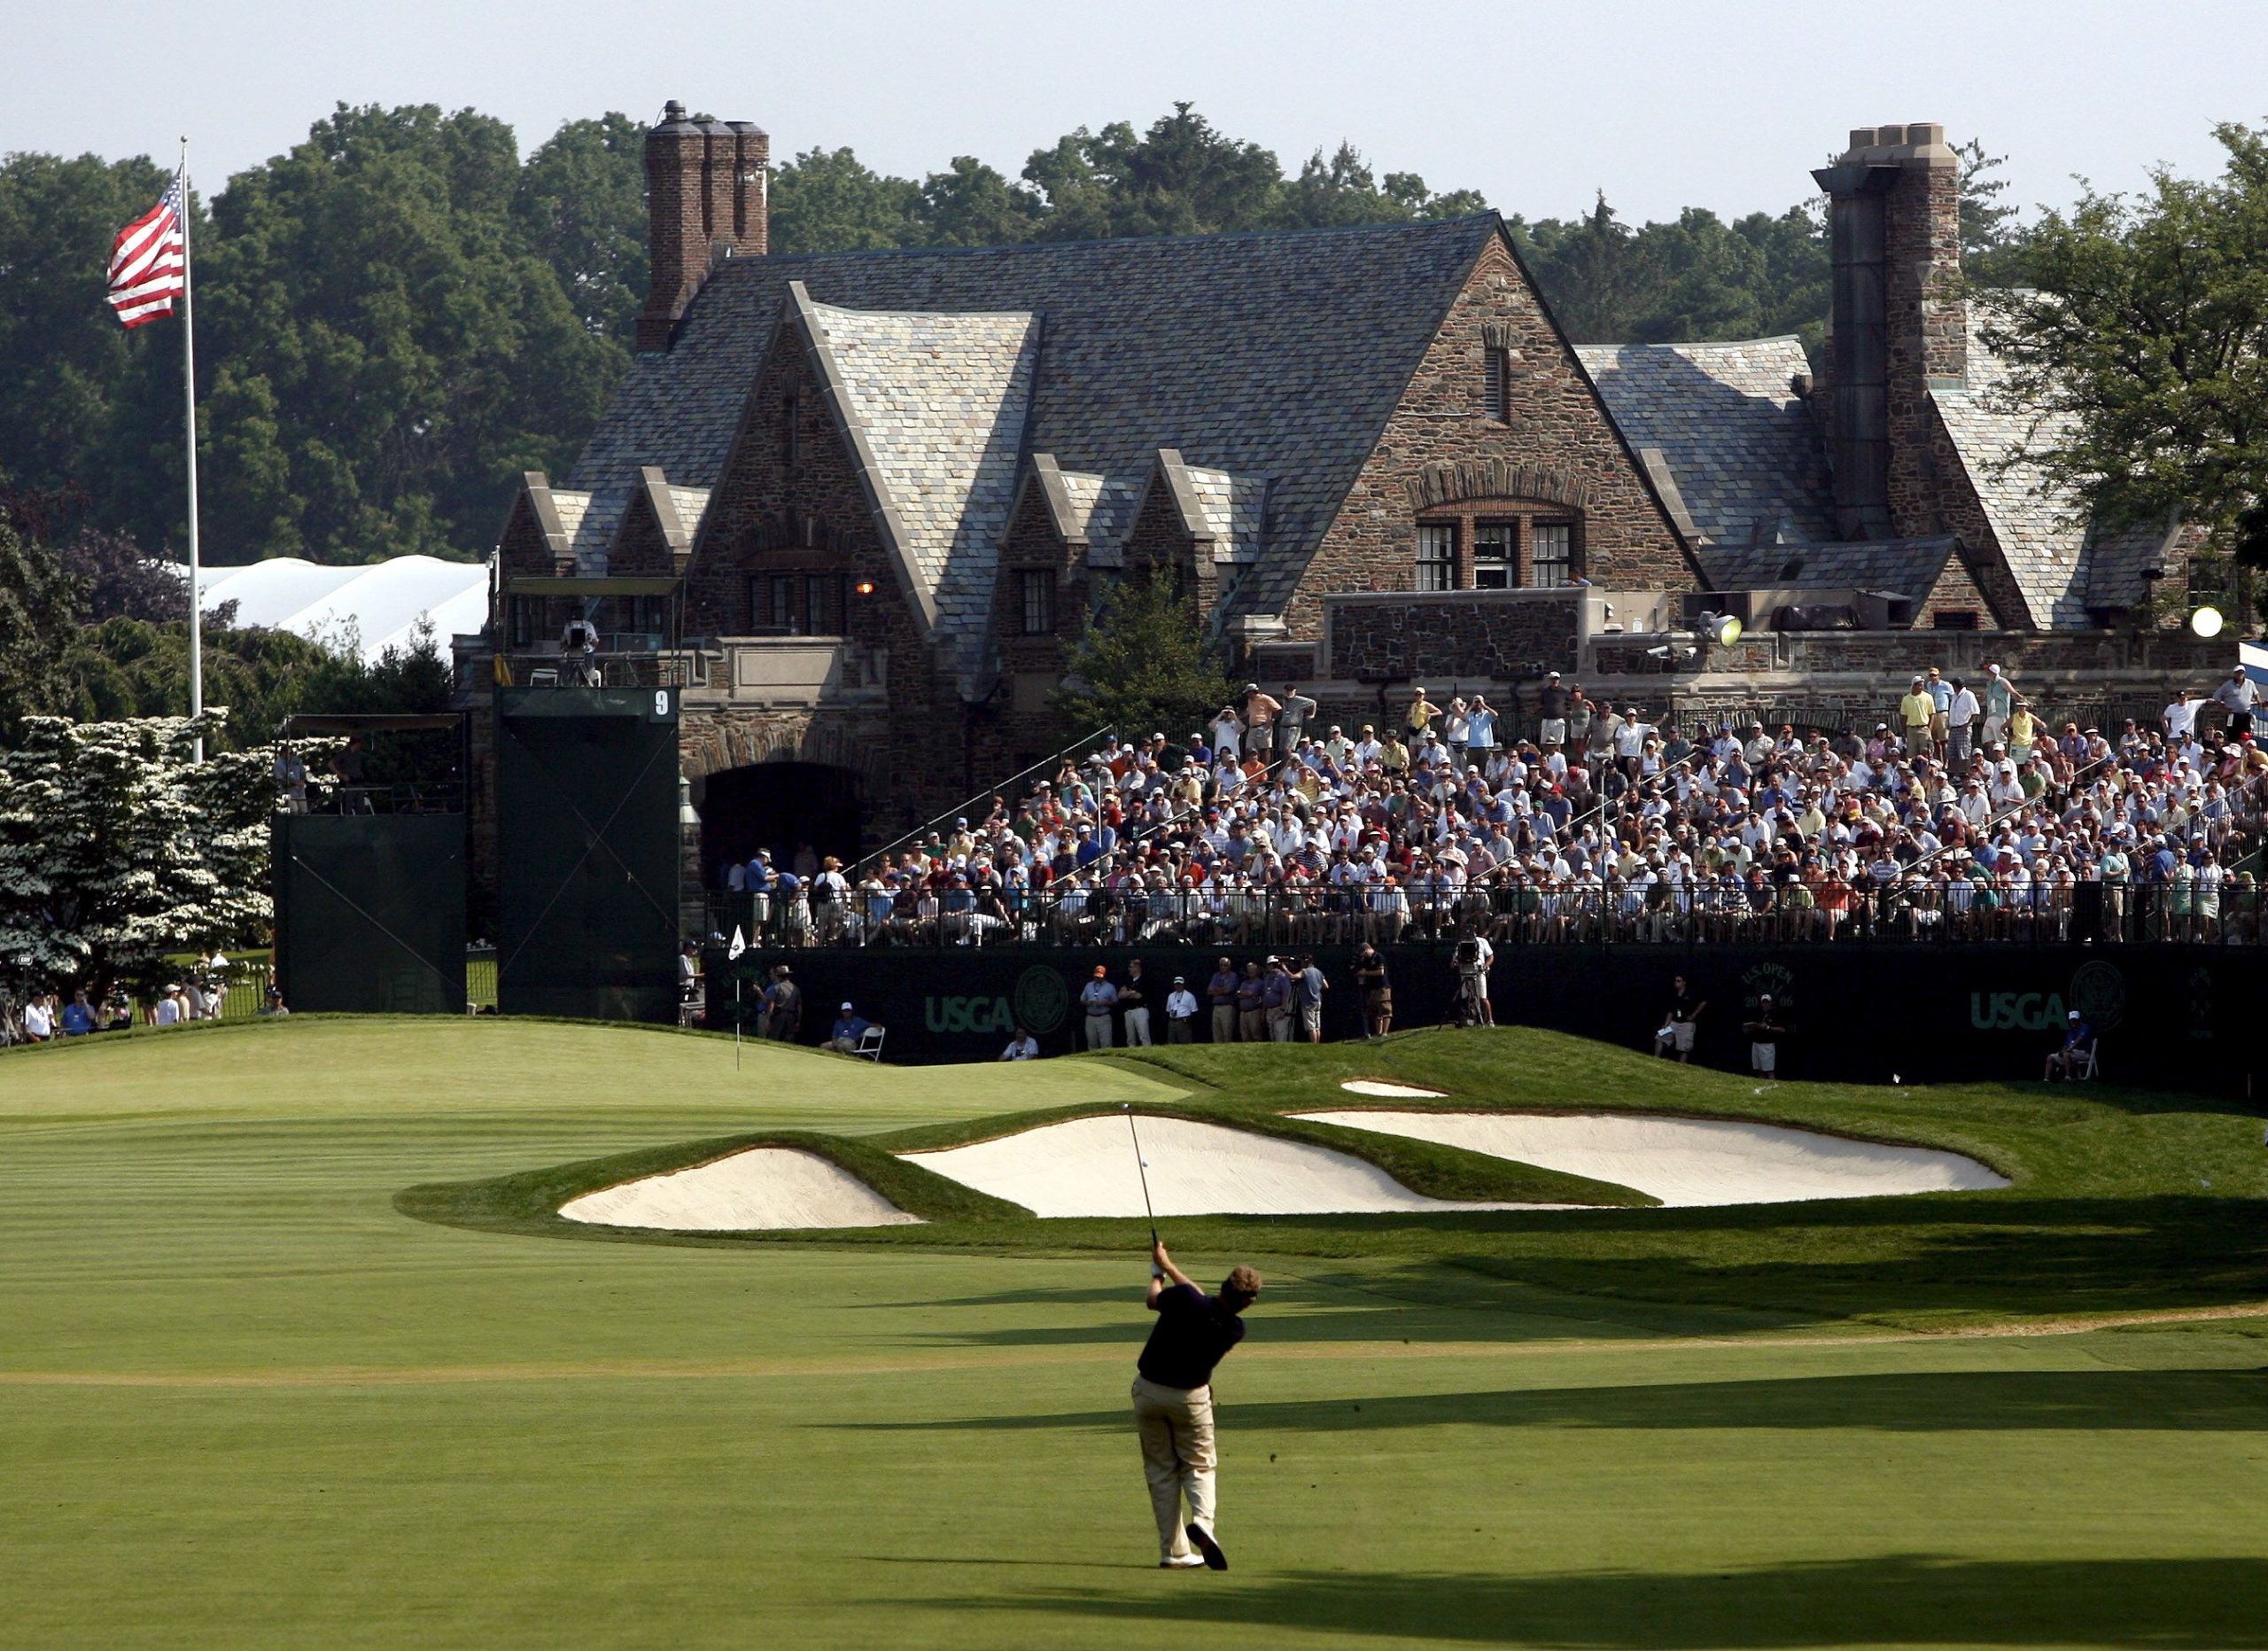 Mandatory Credit: Photo by Andrew Gombert/EPA/Shutterstock (7597355dn)
Colin Montgomerie of Scotland Hits His Second Shot On the Ninth Hole During the Final Day of the Us Open Golf Championship at Winged Foot Golf Club in Mamaroneck New York Sunday 18 June 2006
Usa Golf Us Open - Jun 2006